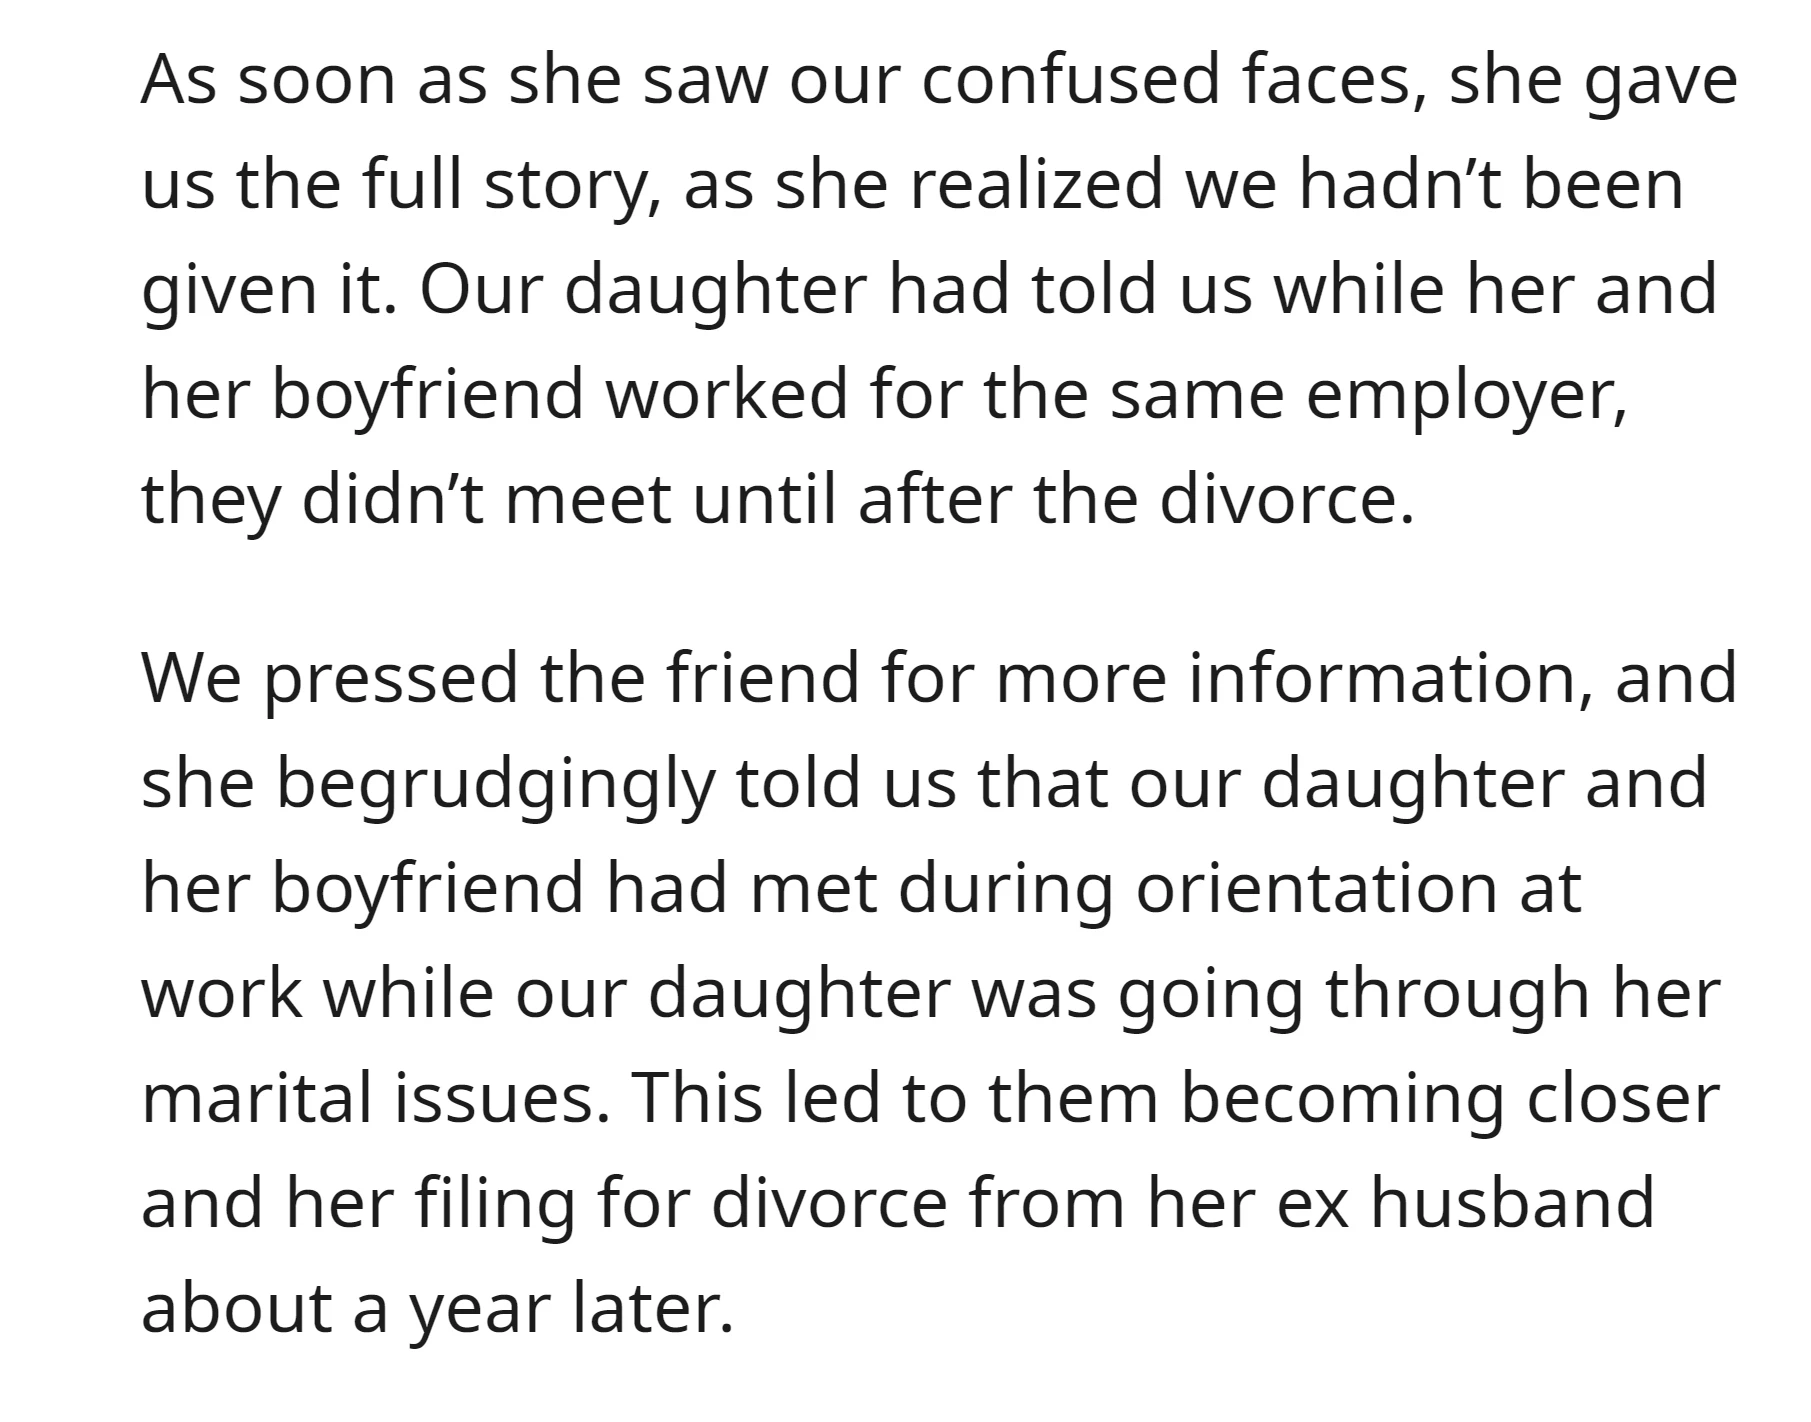 OP found that the cause of her daughter's divorce might be from the close relationship with her boyfriend